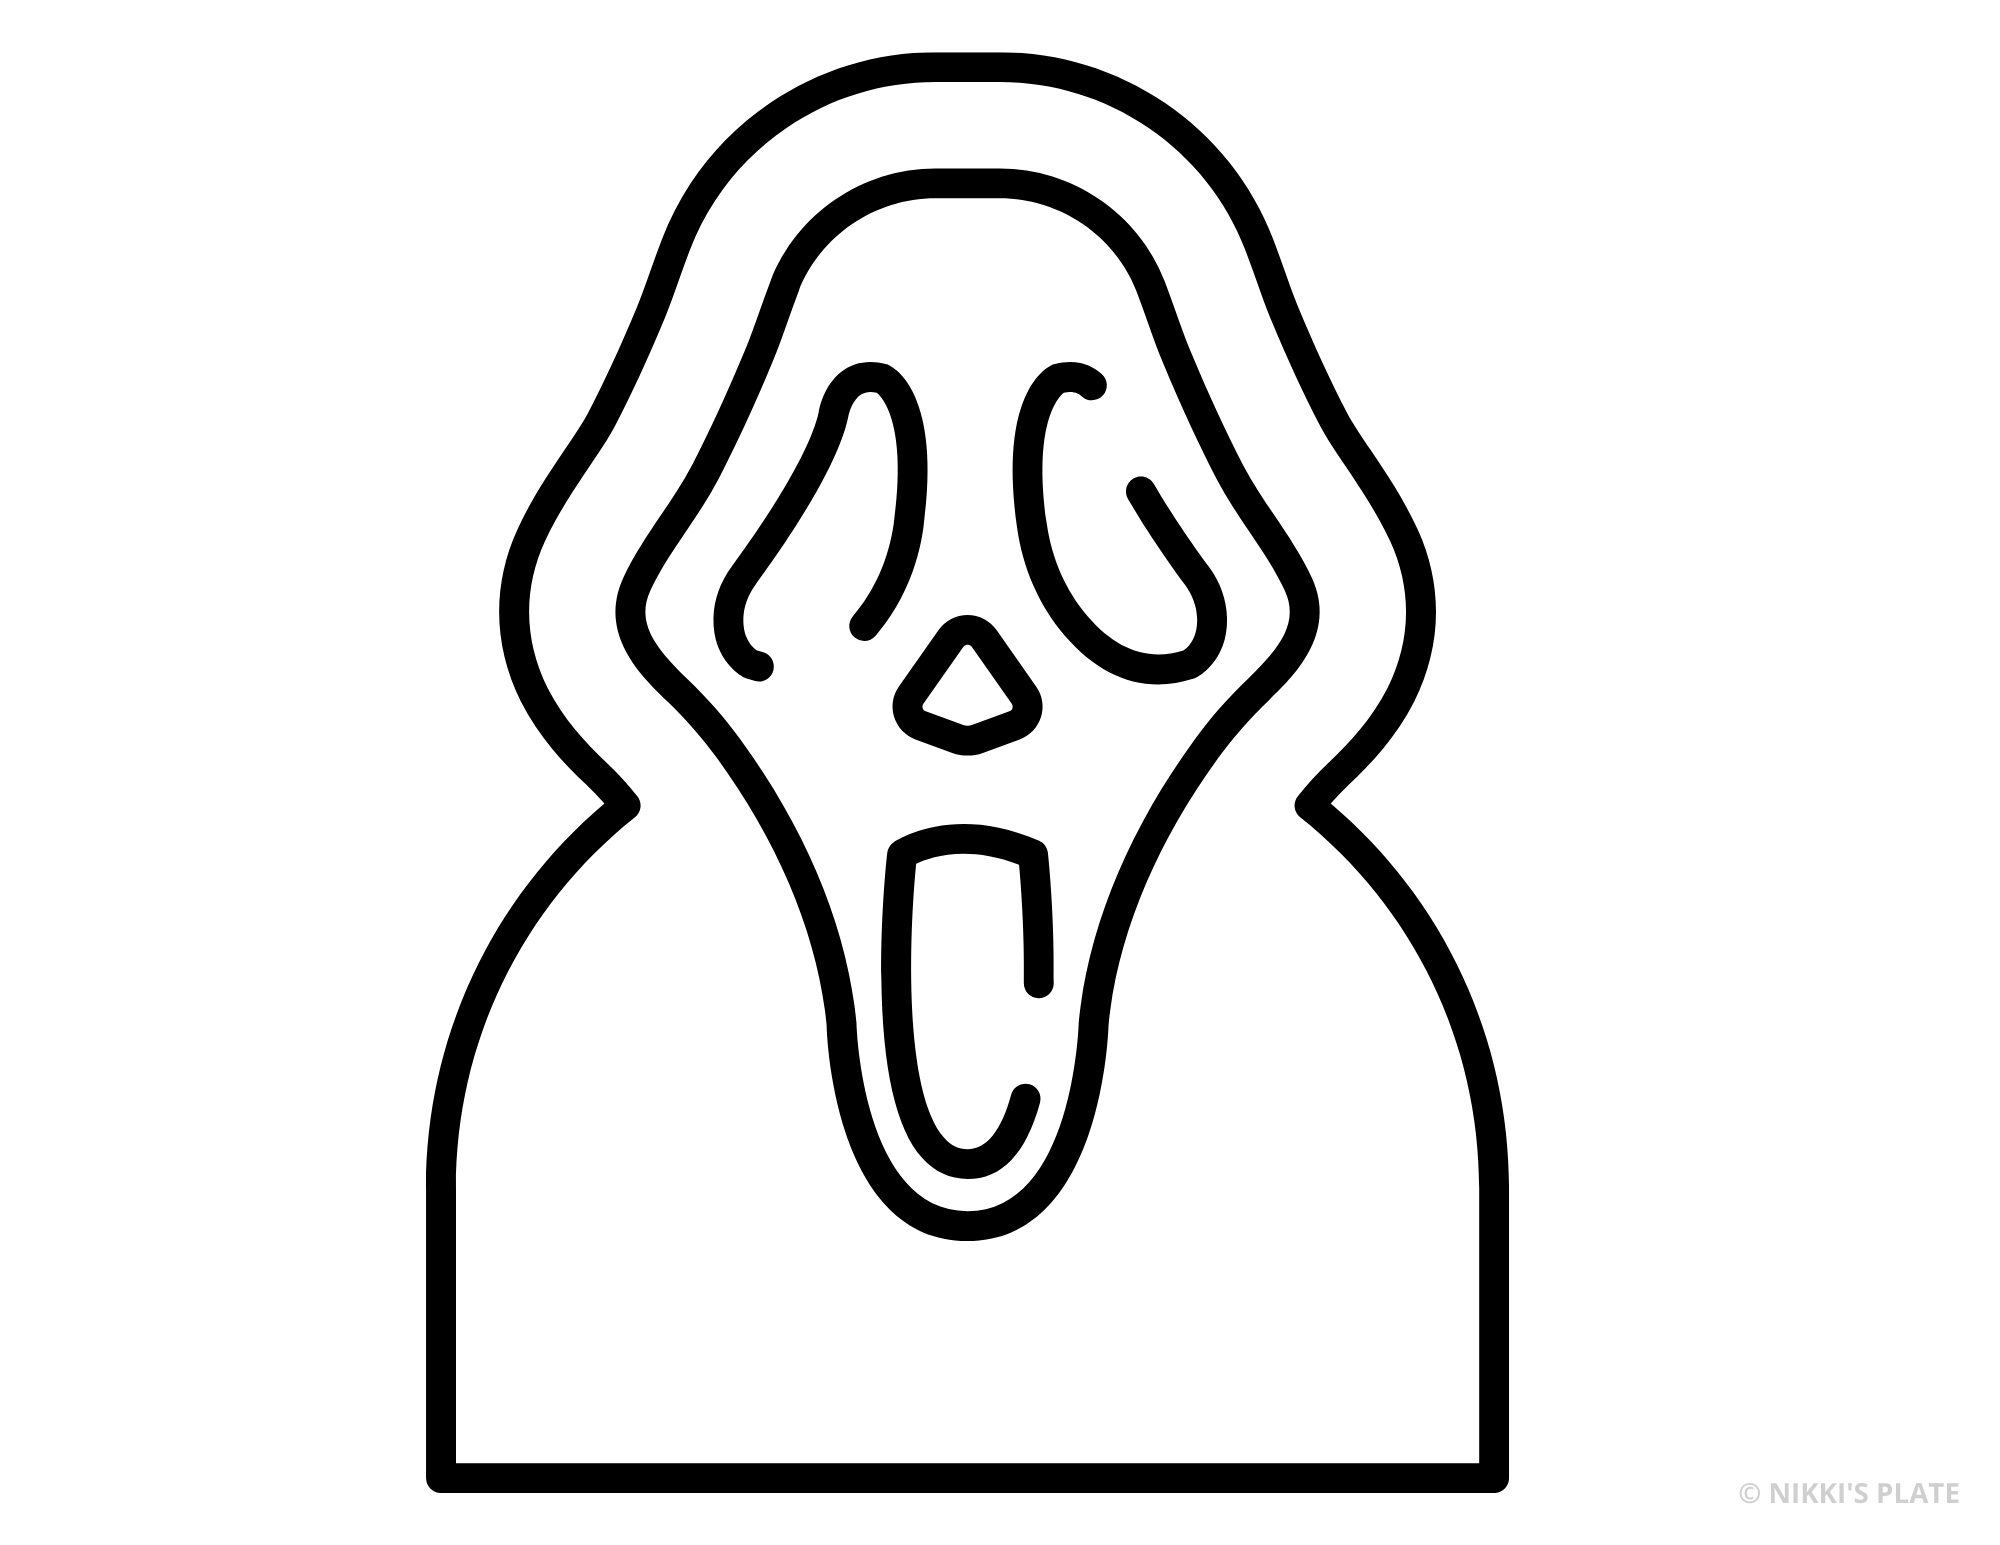 Scream Pumpkin Carving Stencil (FREE PRINTABLE); pumpkin carving scream face that you can print, trace and cut out on your pumpkin for Halloween! 